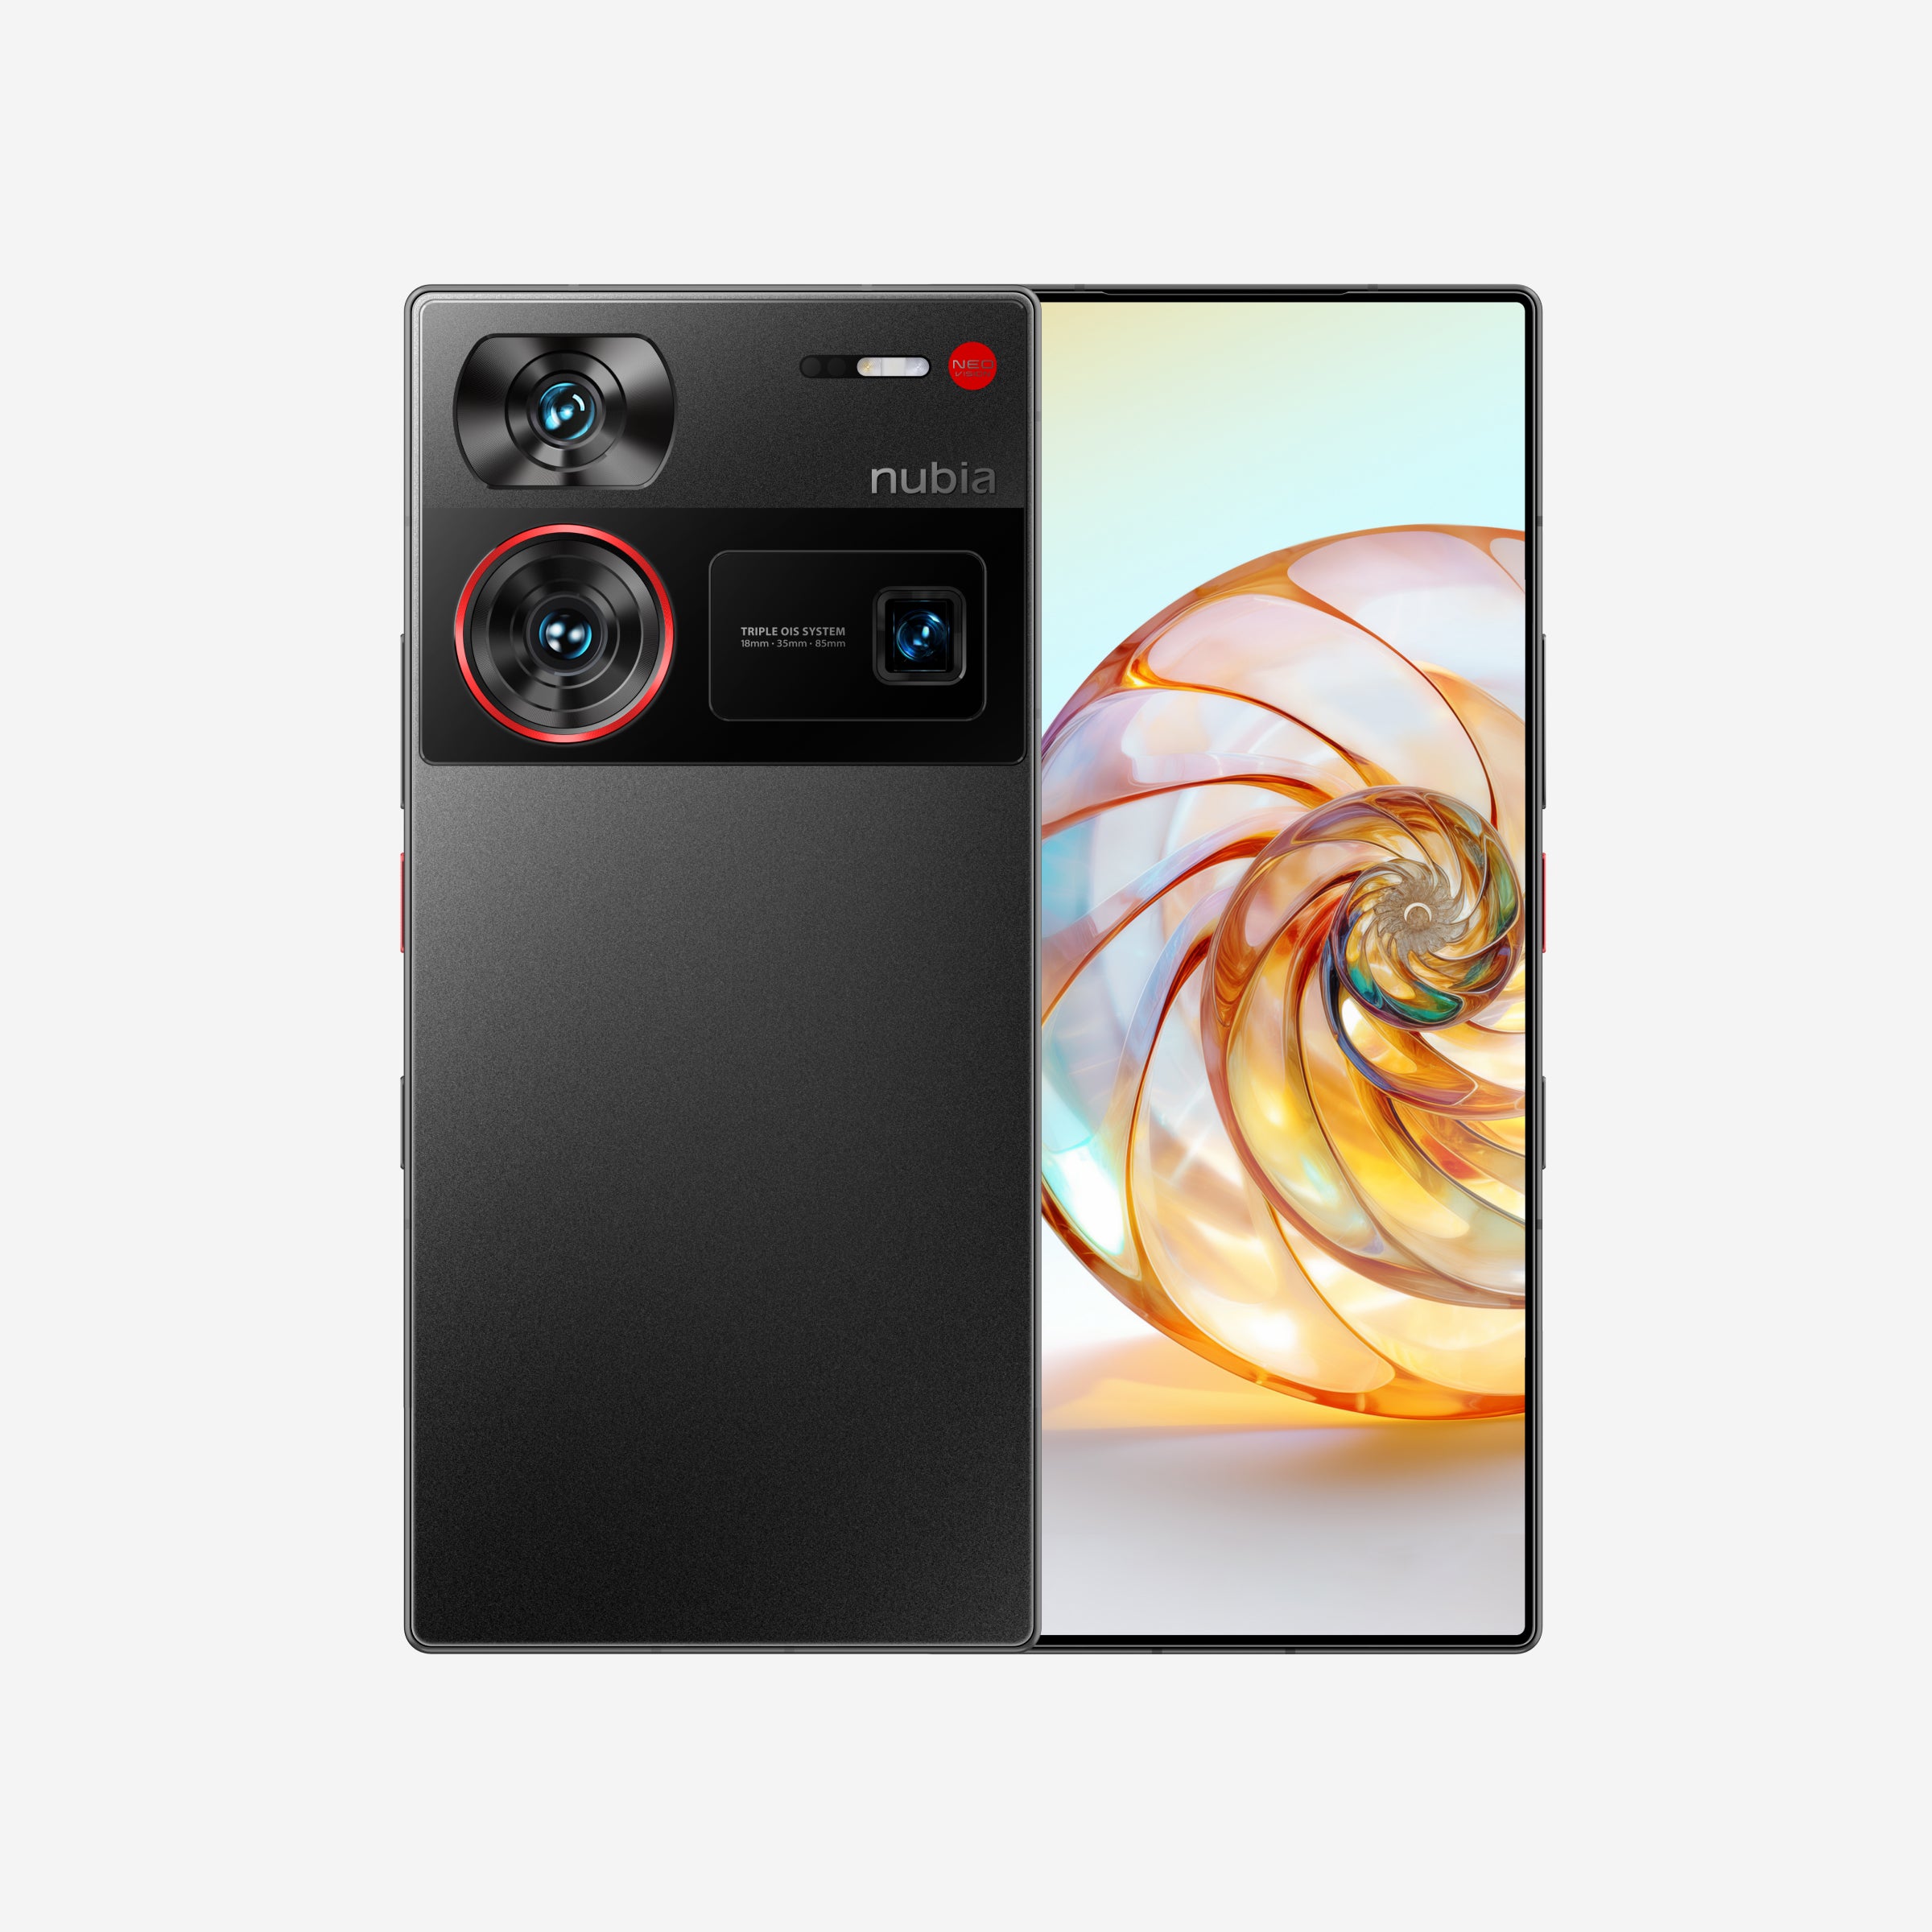 The nubia Z60 Ultra appears in Lazada Online Store on December 25, 2023,  starting at RM 2,899! - 1side0 - Where Binary is Tech